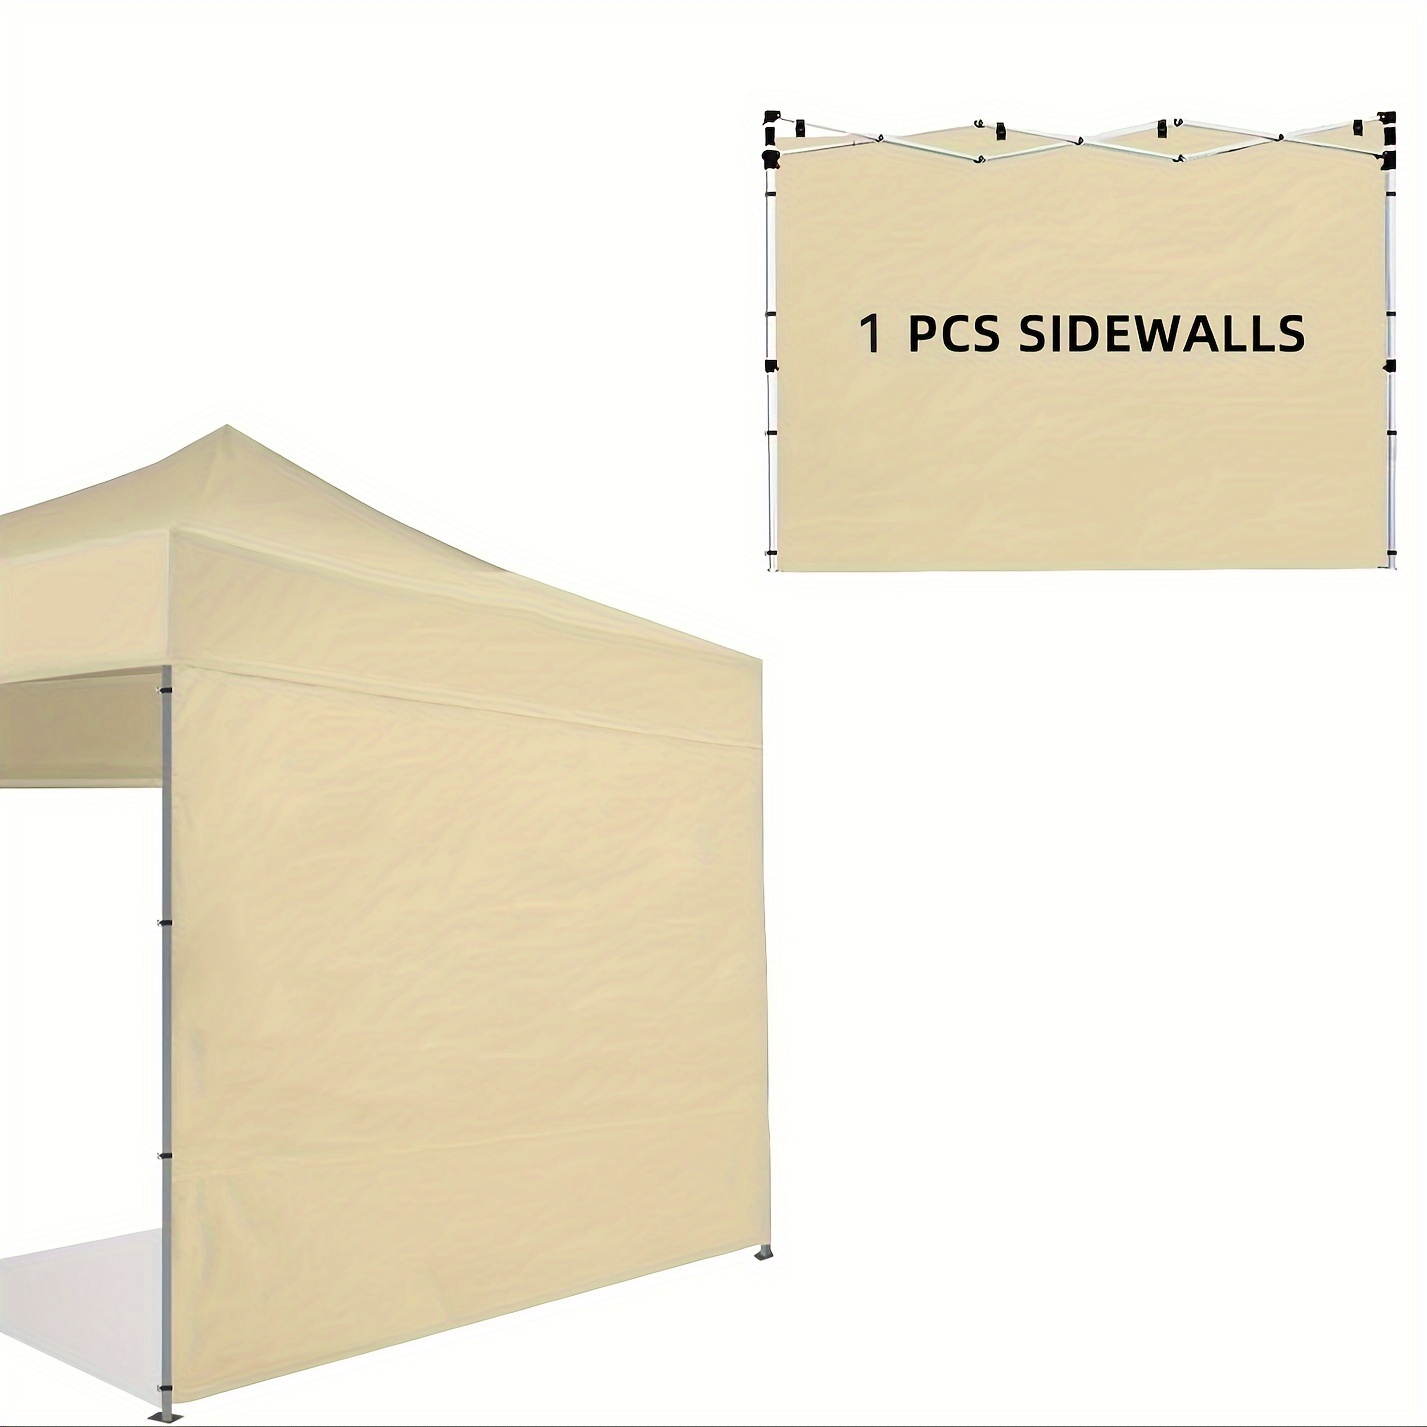 

1pc300cm Khaki Outdoor Sunshade Wall, Pop Up Sunshade Canopy Side Wall, Suitable For Instant Sunshade Tent Gazebo, Sunshade, Rainproof, Blackout (metal Structure Not Included)